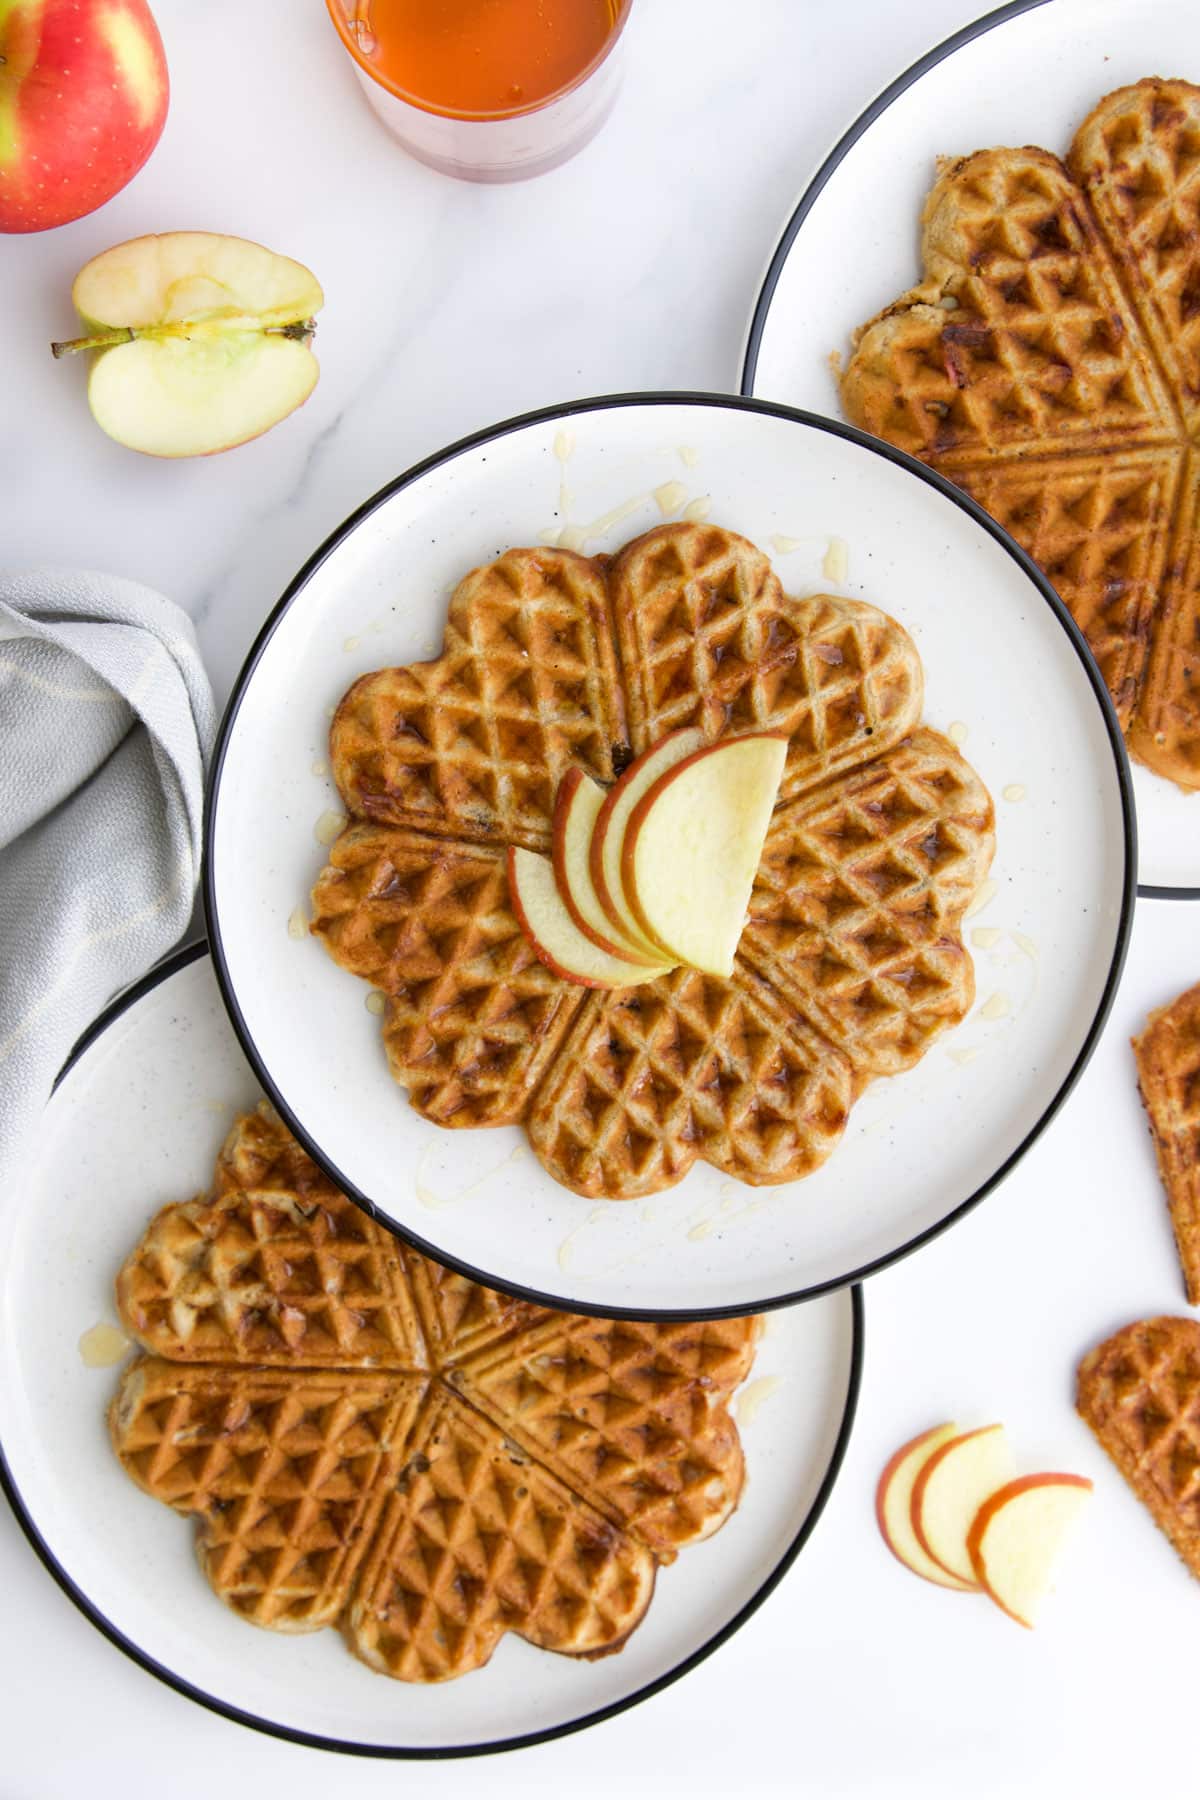 Three Plates Each with An Apple Waffle on Them. Cut Apple and Extra Waffles in Background. 